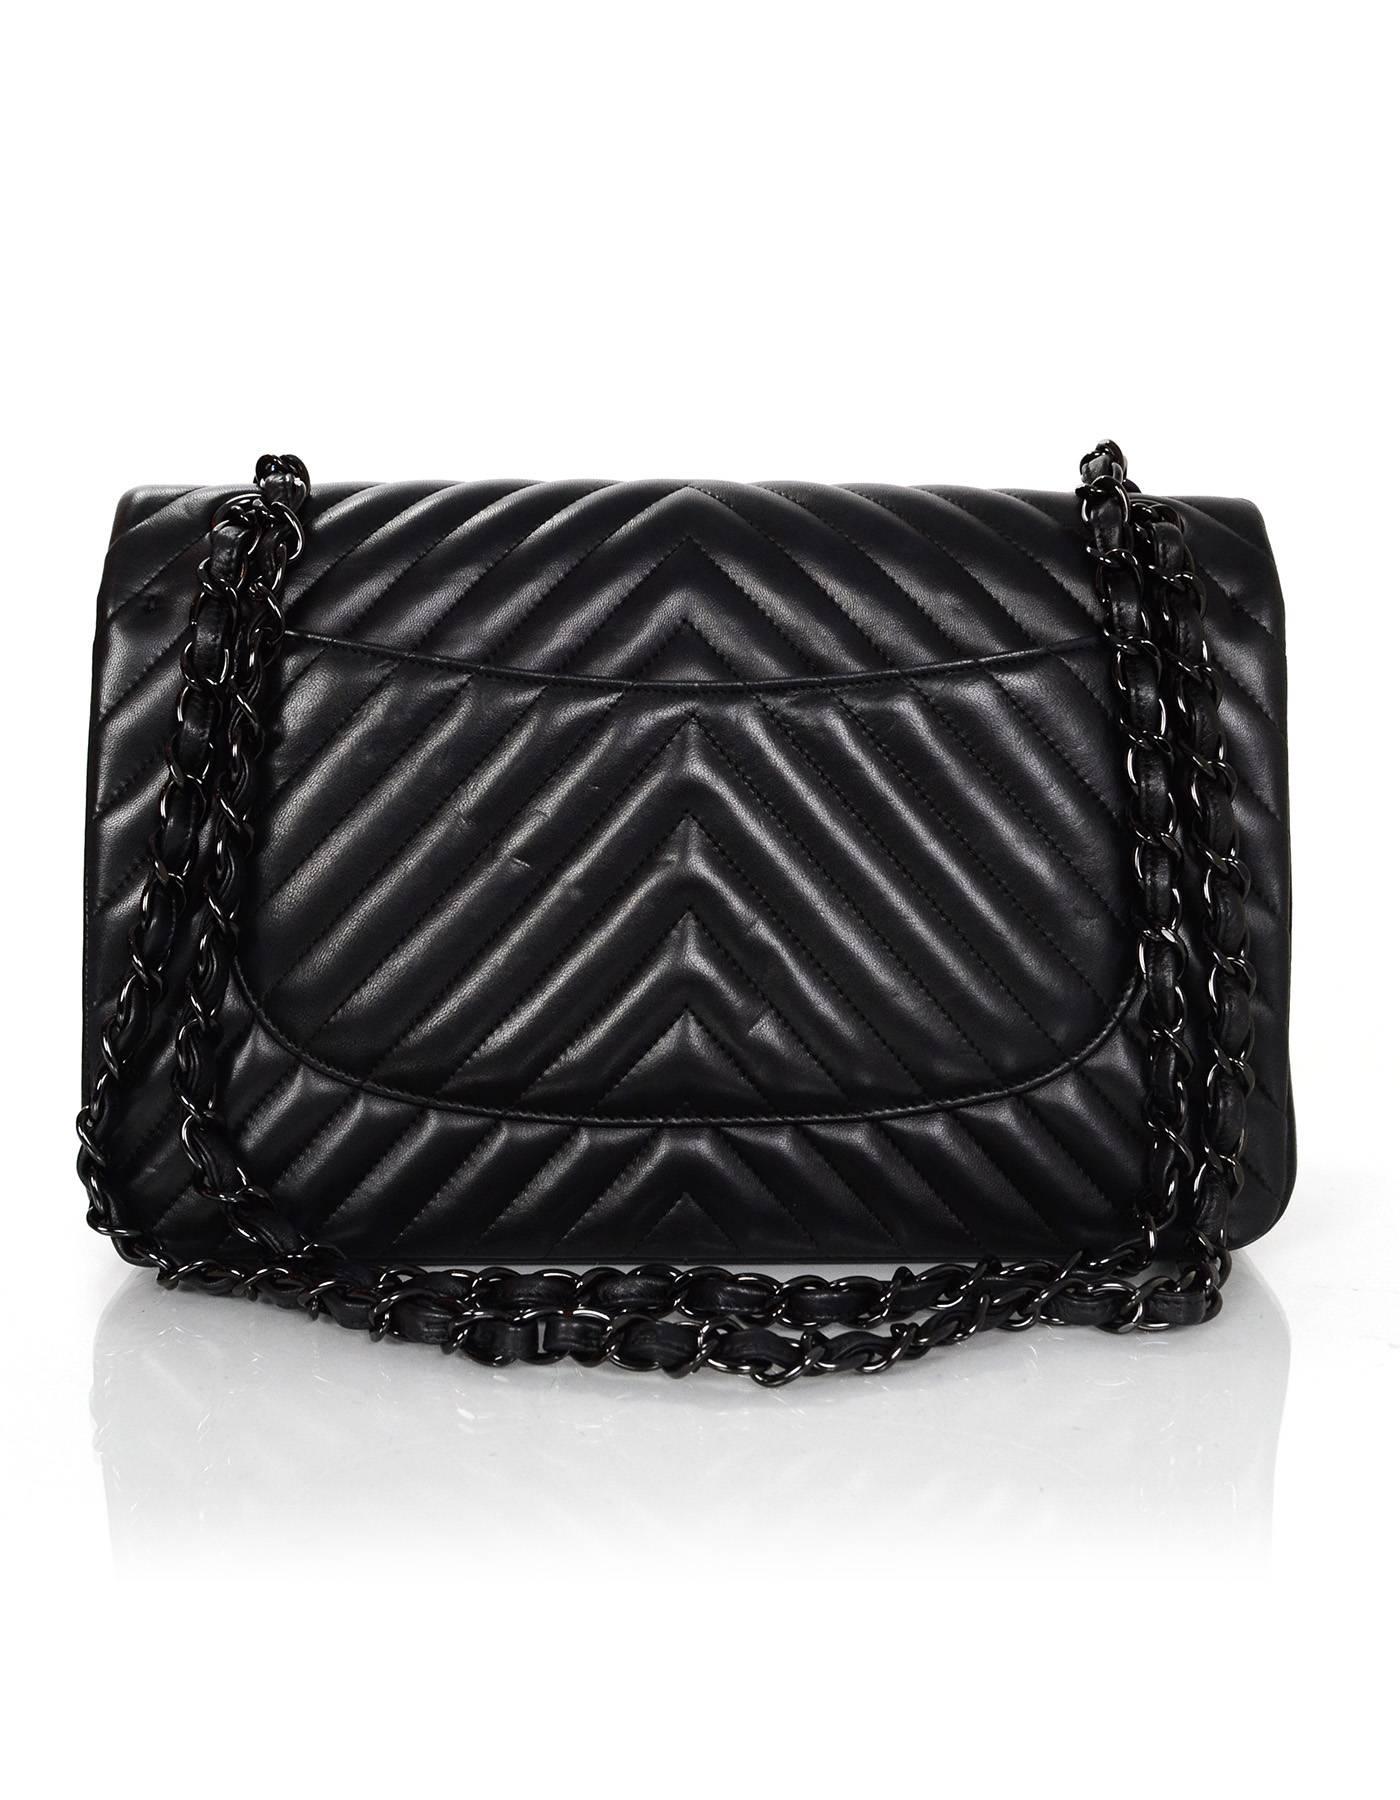 Chanel Rare Collectors Sold Out Chevron SO Black Double Flap Jumbo Classic Bag 3